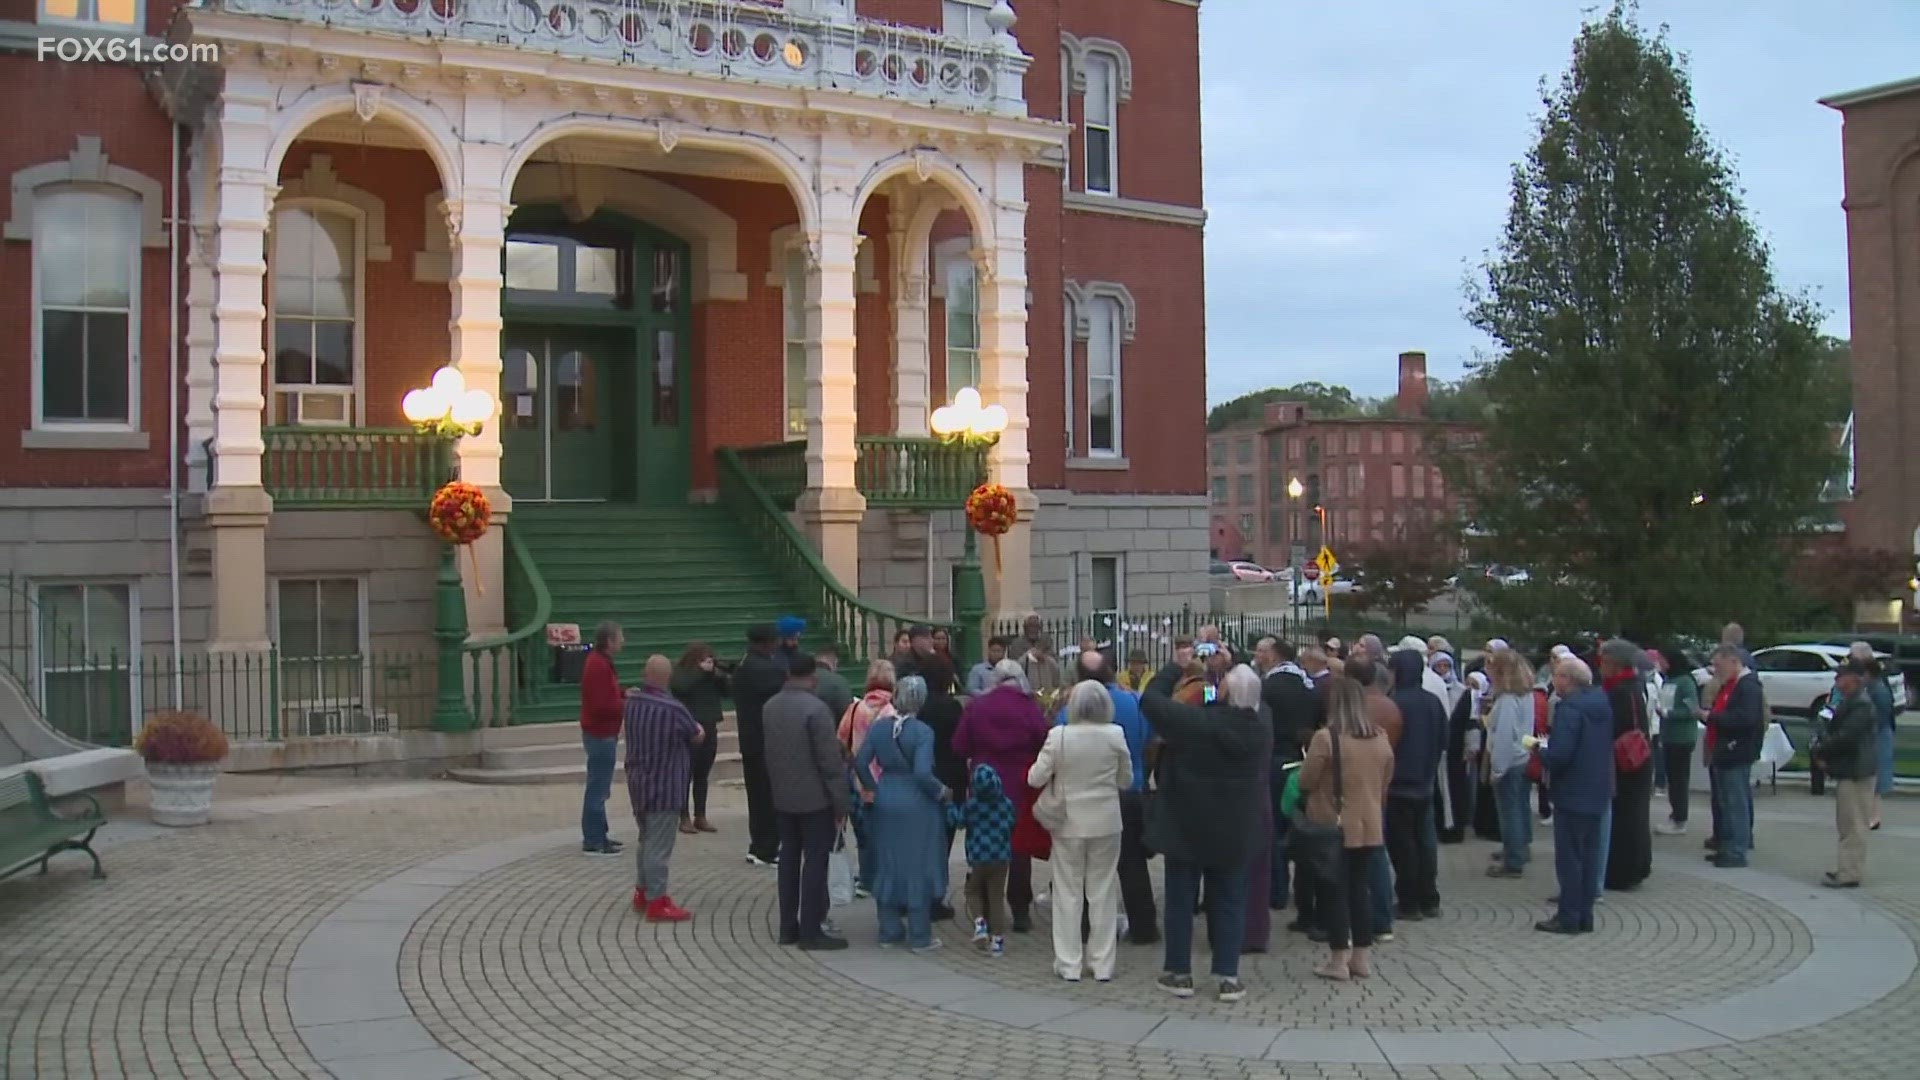 The vigil was hosted by the Norwich Area Interfaith Association on Tuesday evening.